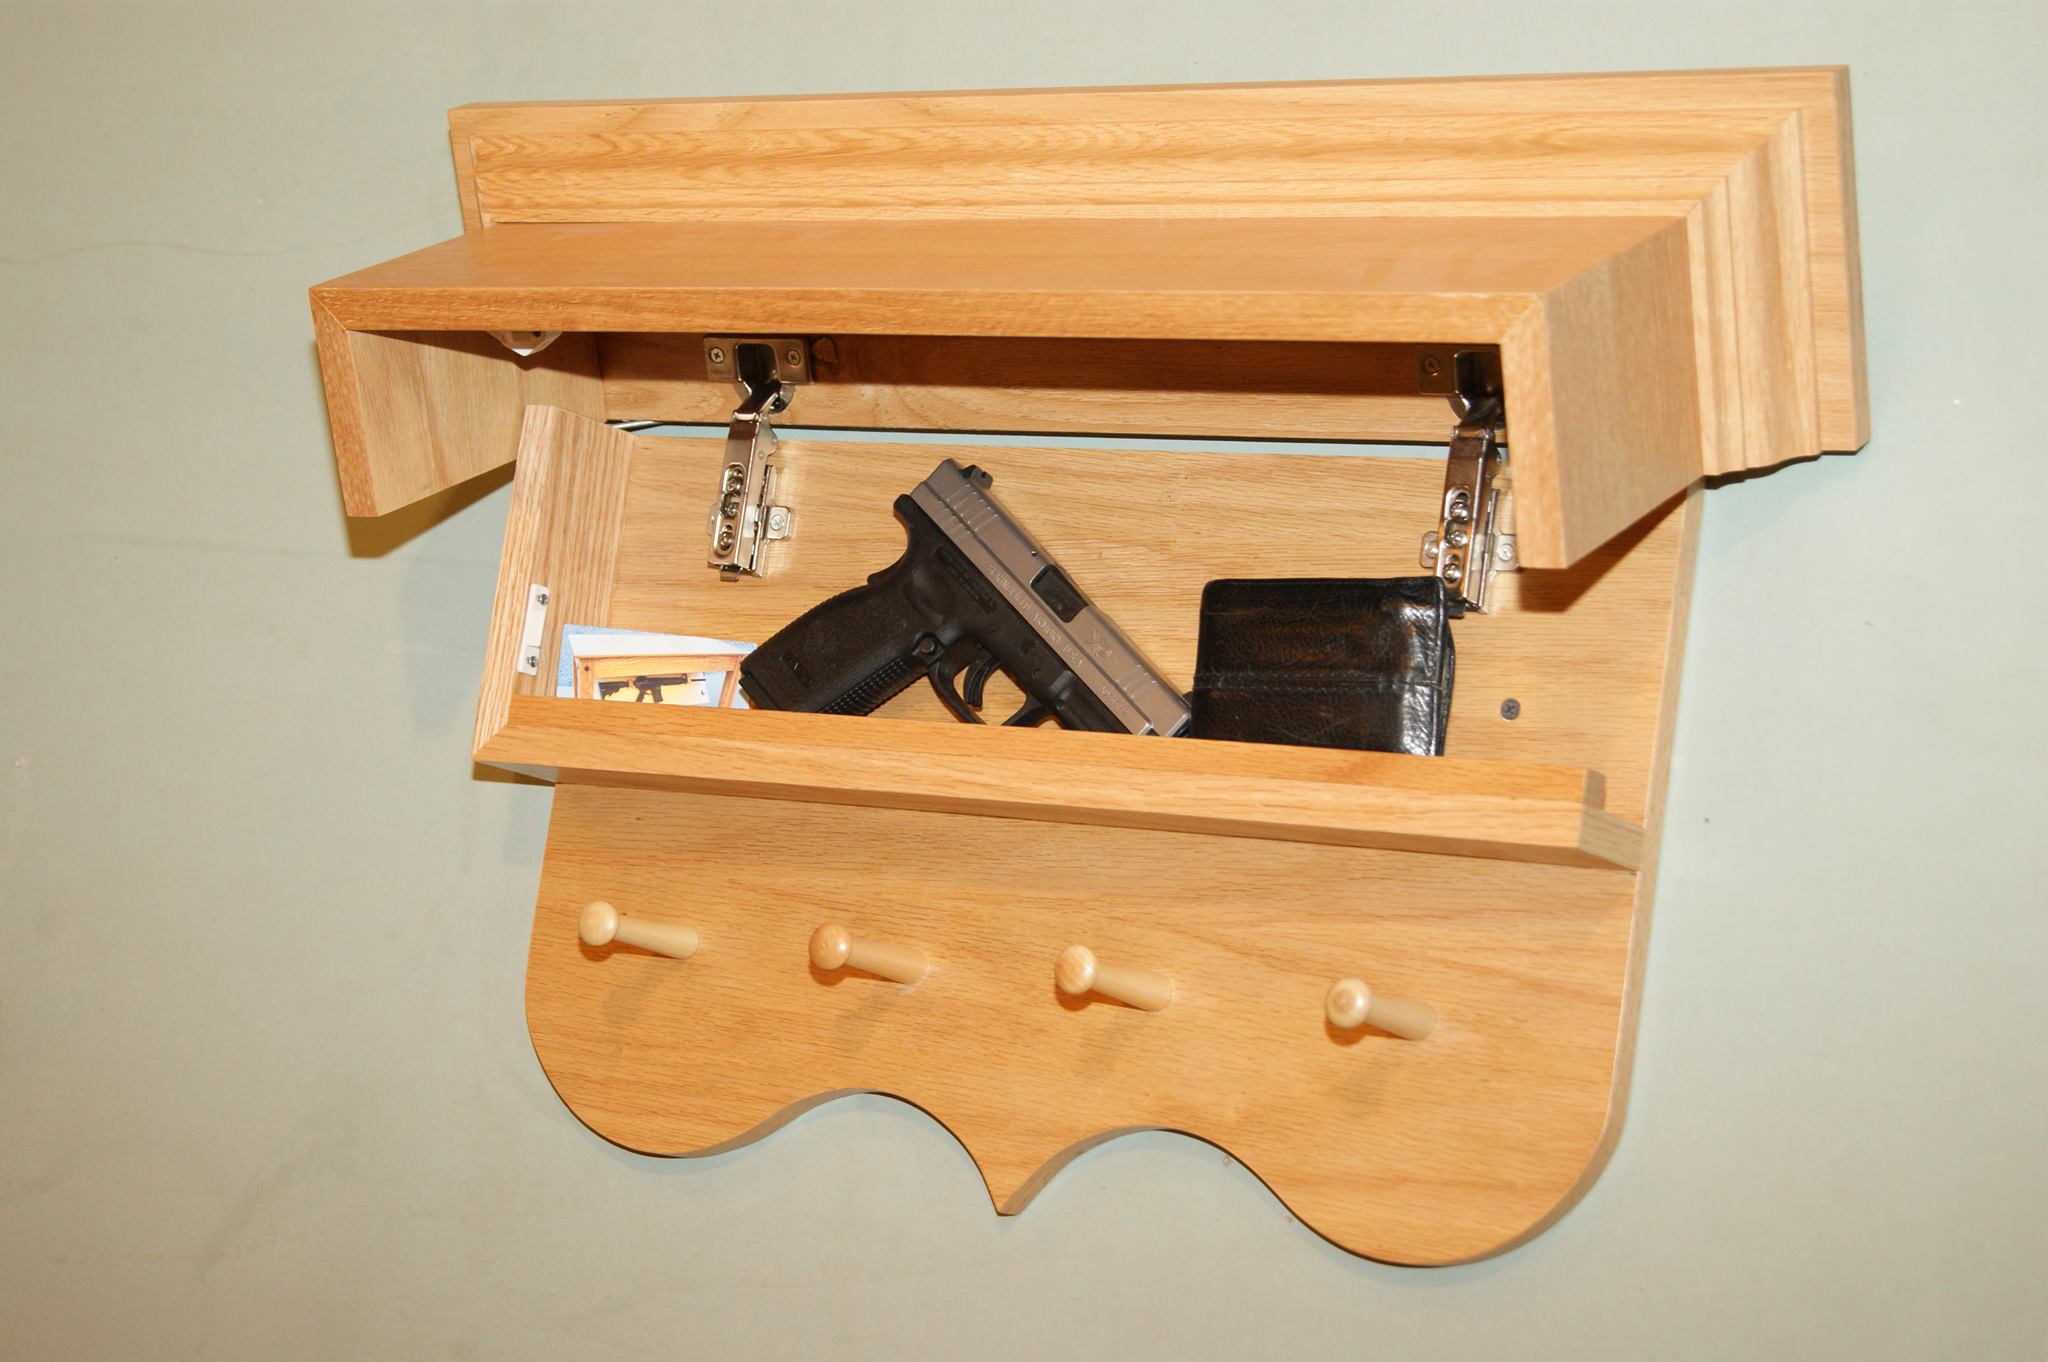 Long Gun Storage Compartment In Coffee Table | Extra Ordinary Blog